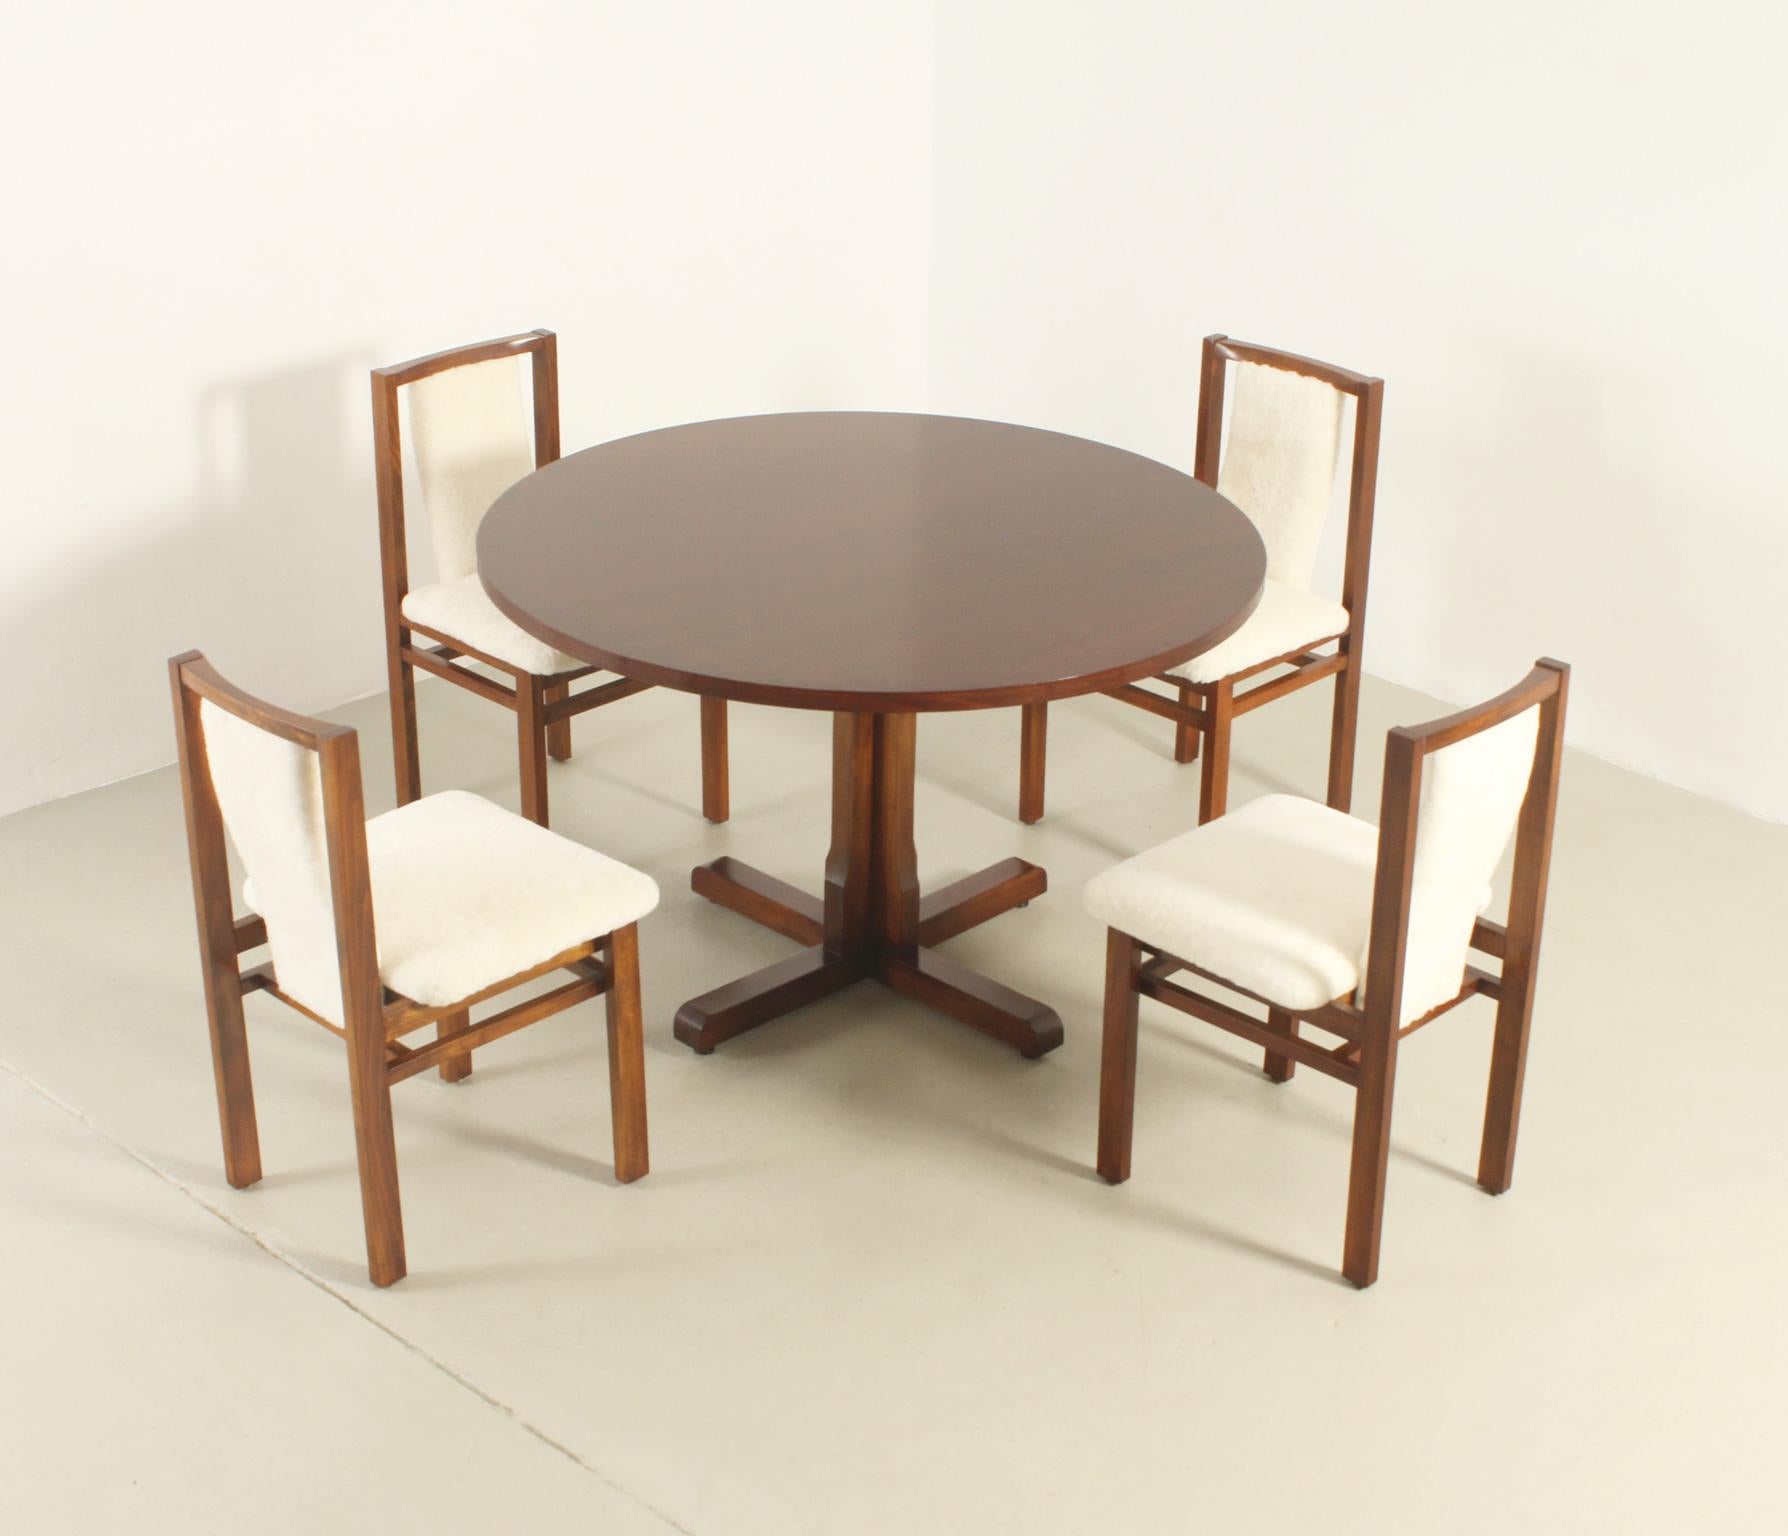 Round Dining Table in Walnut Wood by Jordi Vilanova, Spain, 1960's For Sale 9